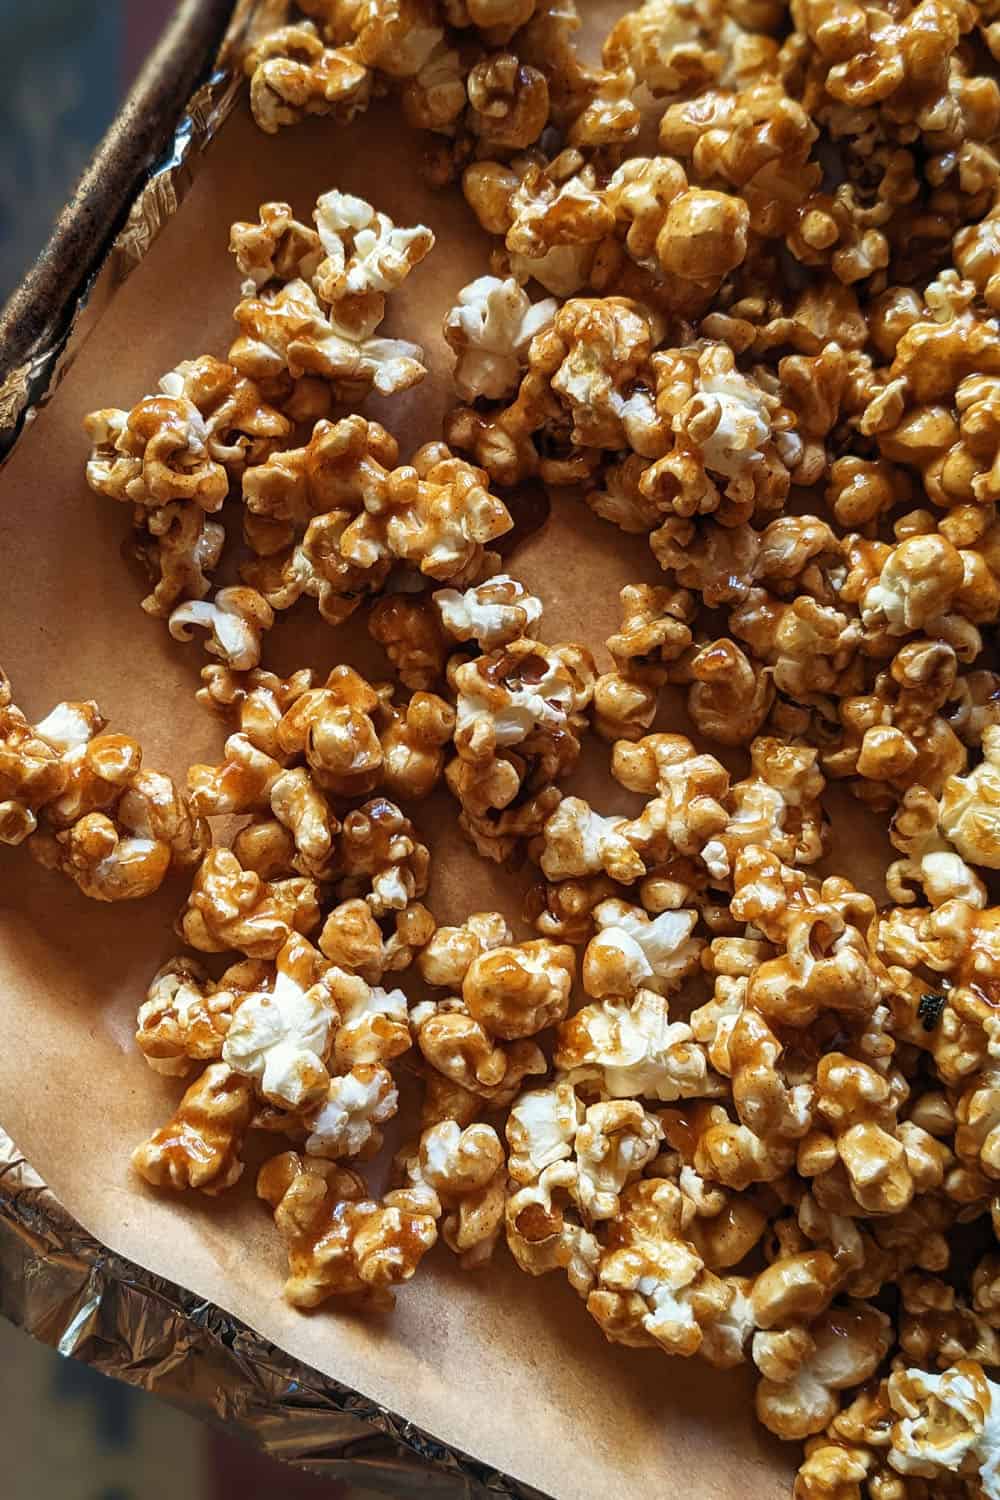 Red Chile Caramel Corn - on a sheet tray